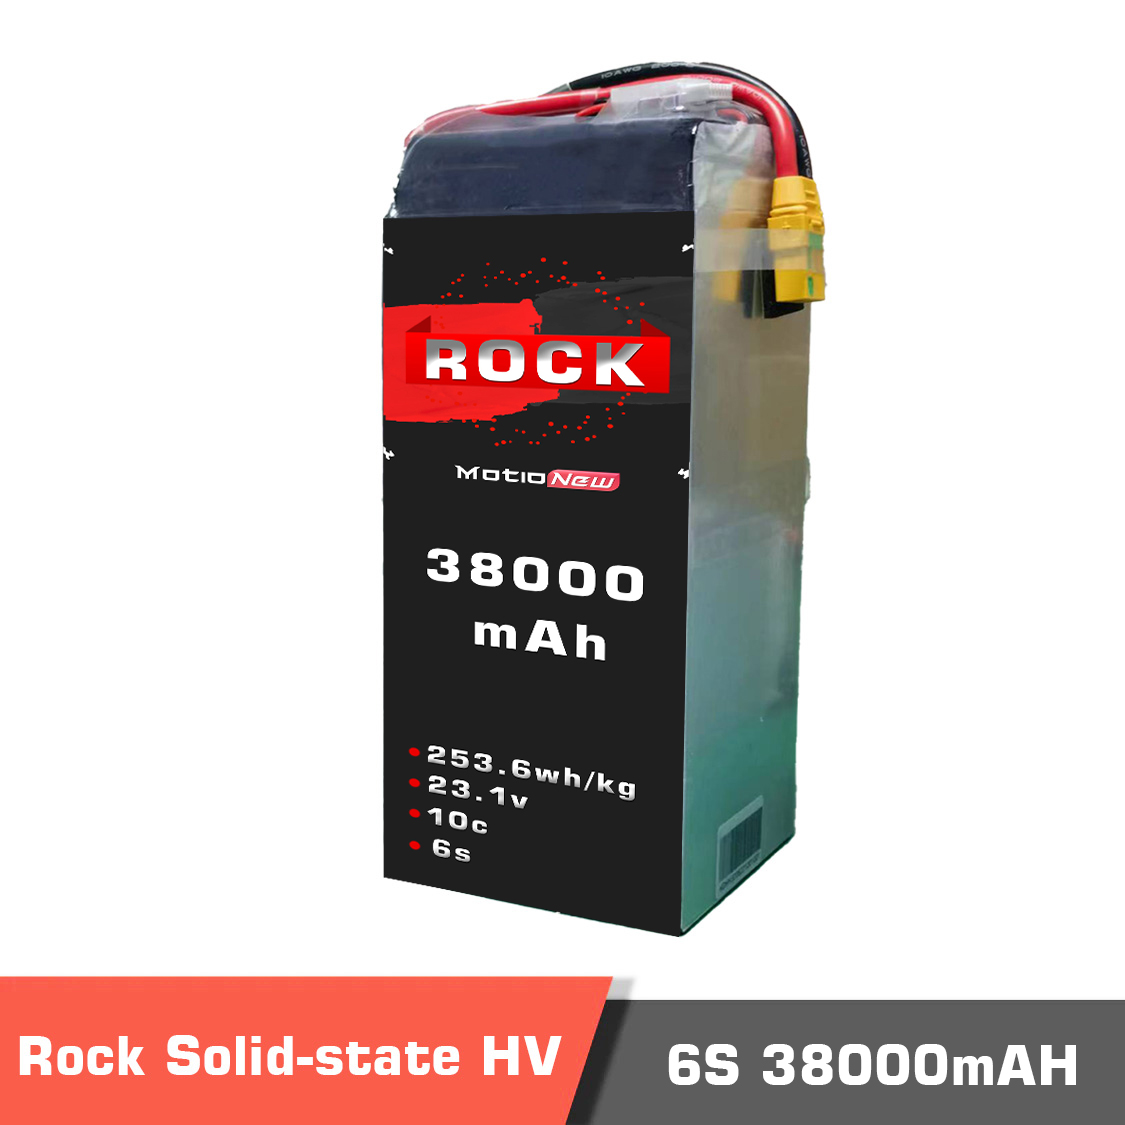 6s38 - ultra rock ultra hv semi solid-state battery,ultra hv semi solid-state battery,6s 88000mah high voltage lipo battery,6s 88000mah hv lipo battery,solid-state lipo battery,lipo battery,drone battery,6s battery,high energy density battery,uav,drone,vtol - motionew - 1